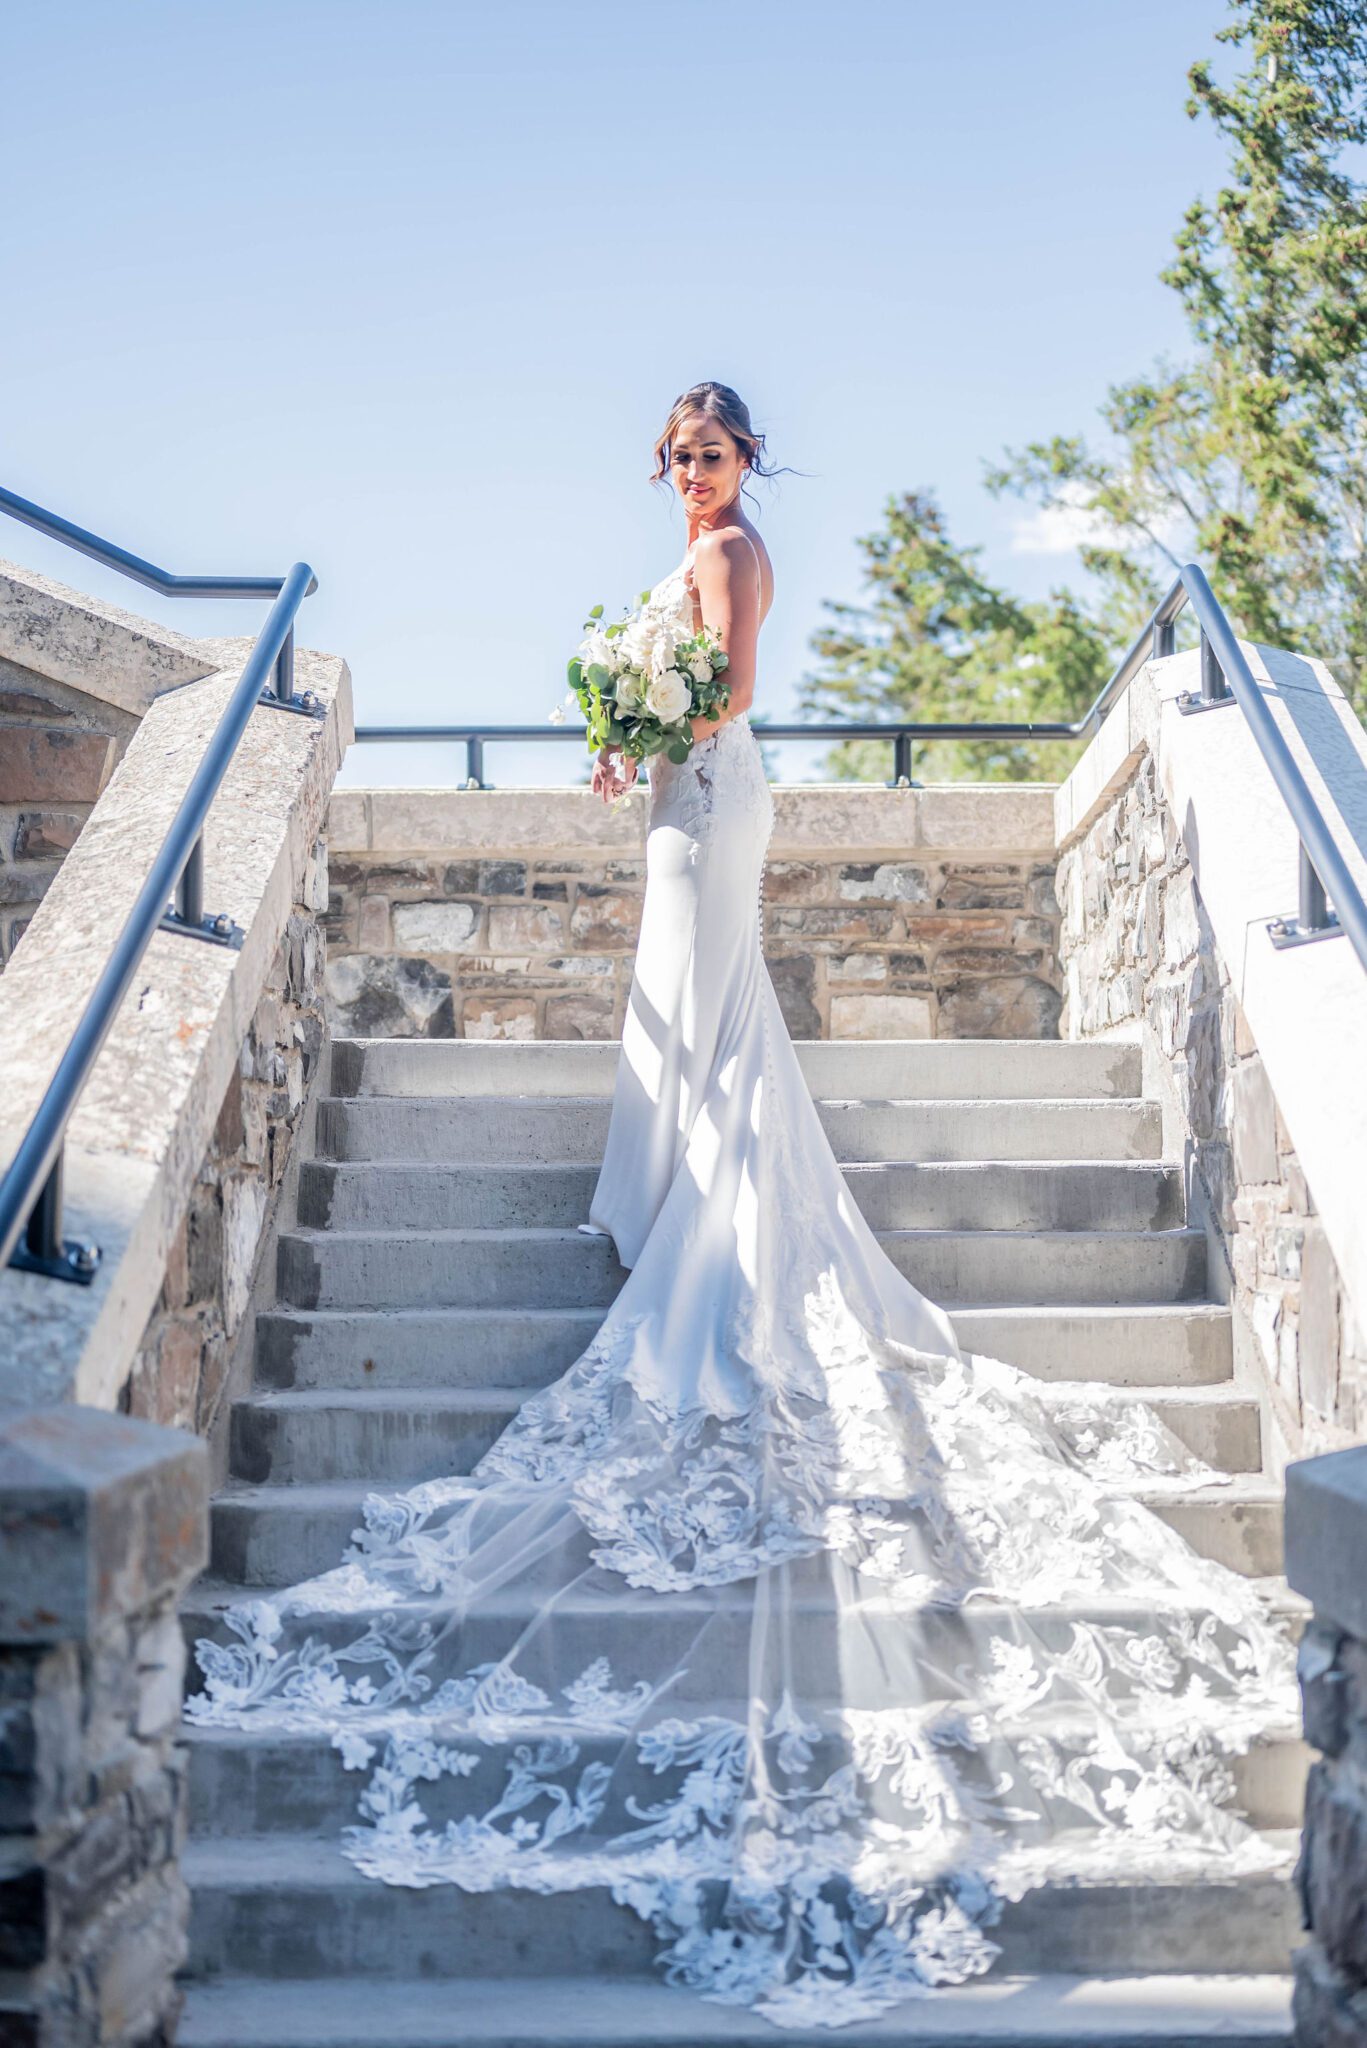 Elegant portrait in the summer sun of bride on the staircase of the Fairmont Banff Springs, lace wedding gown draping down, bride holding white floral bouquet with greenery. 